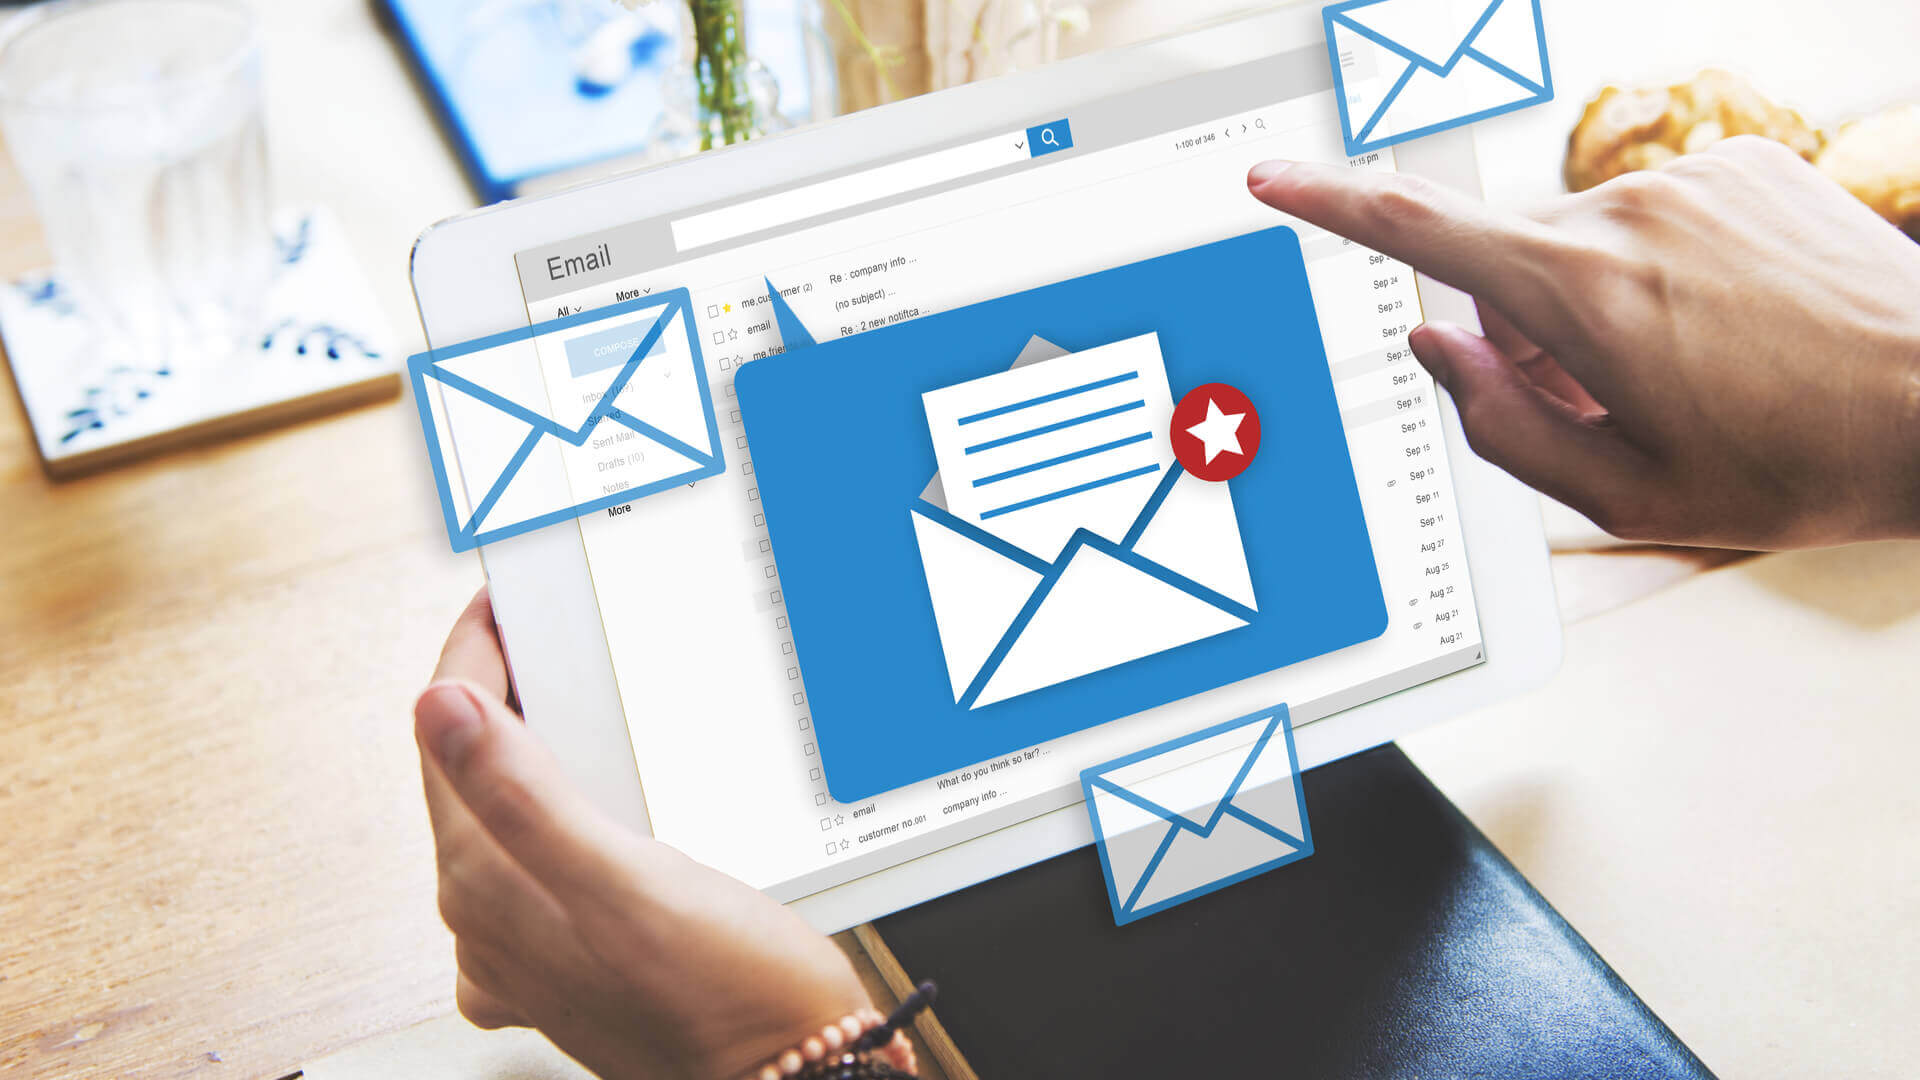 How to embed images in your marketing emails